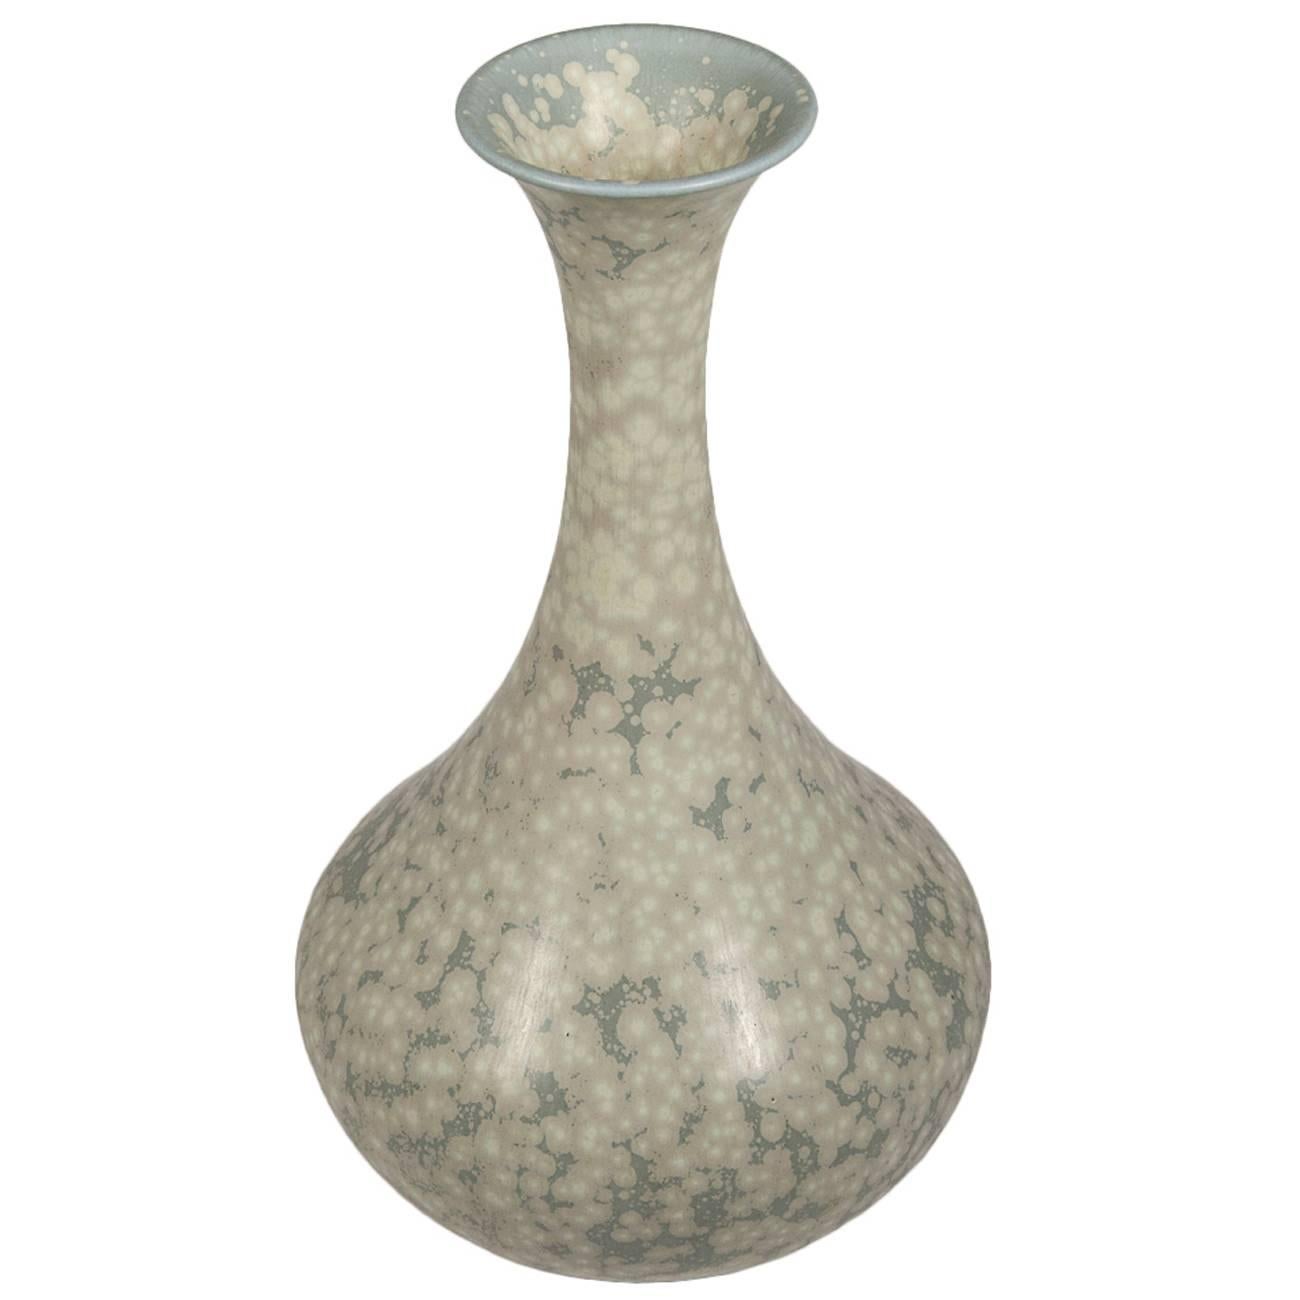 A Gunnar Nylund vase for Rorstrand in a beautiful crystalline glaze. Maker's mark and ceramist's initials on bottom.